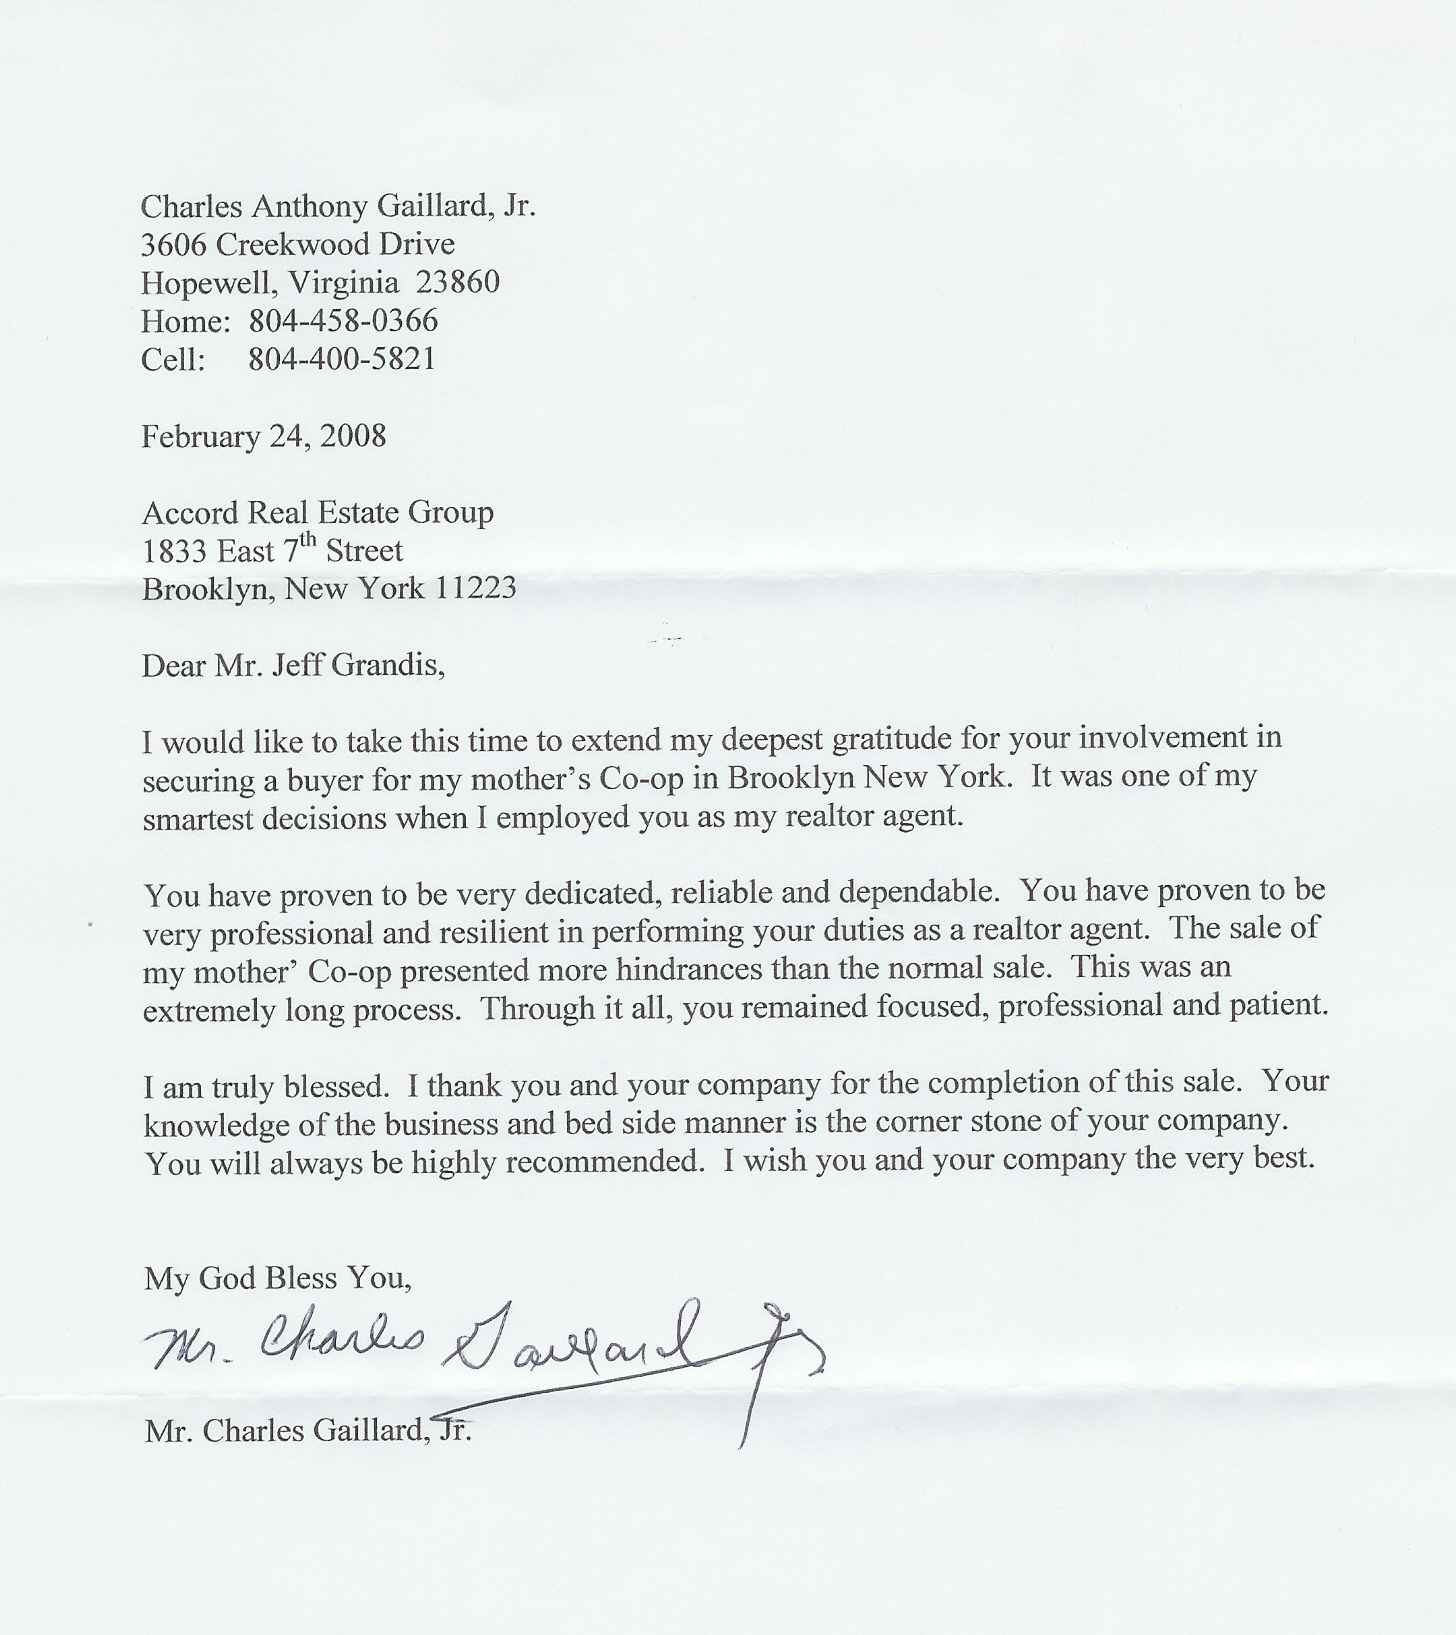 Letter of recomendation from Charles A Gaillard,  Jr.